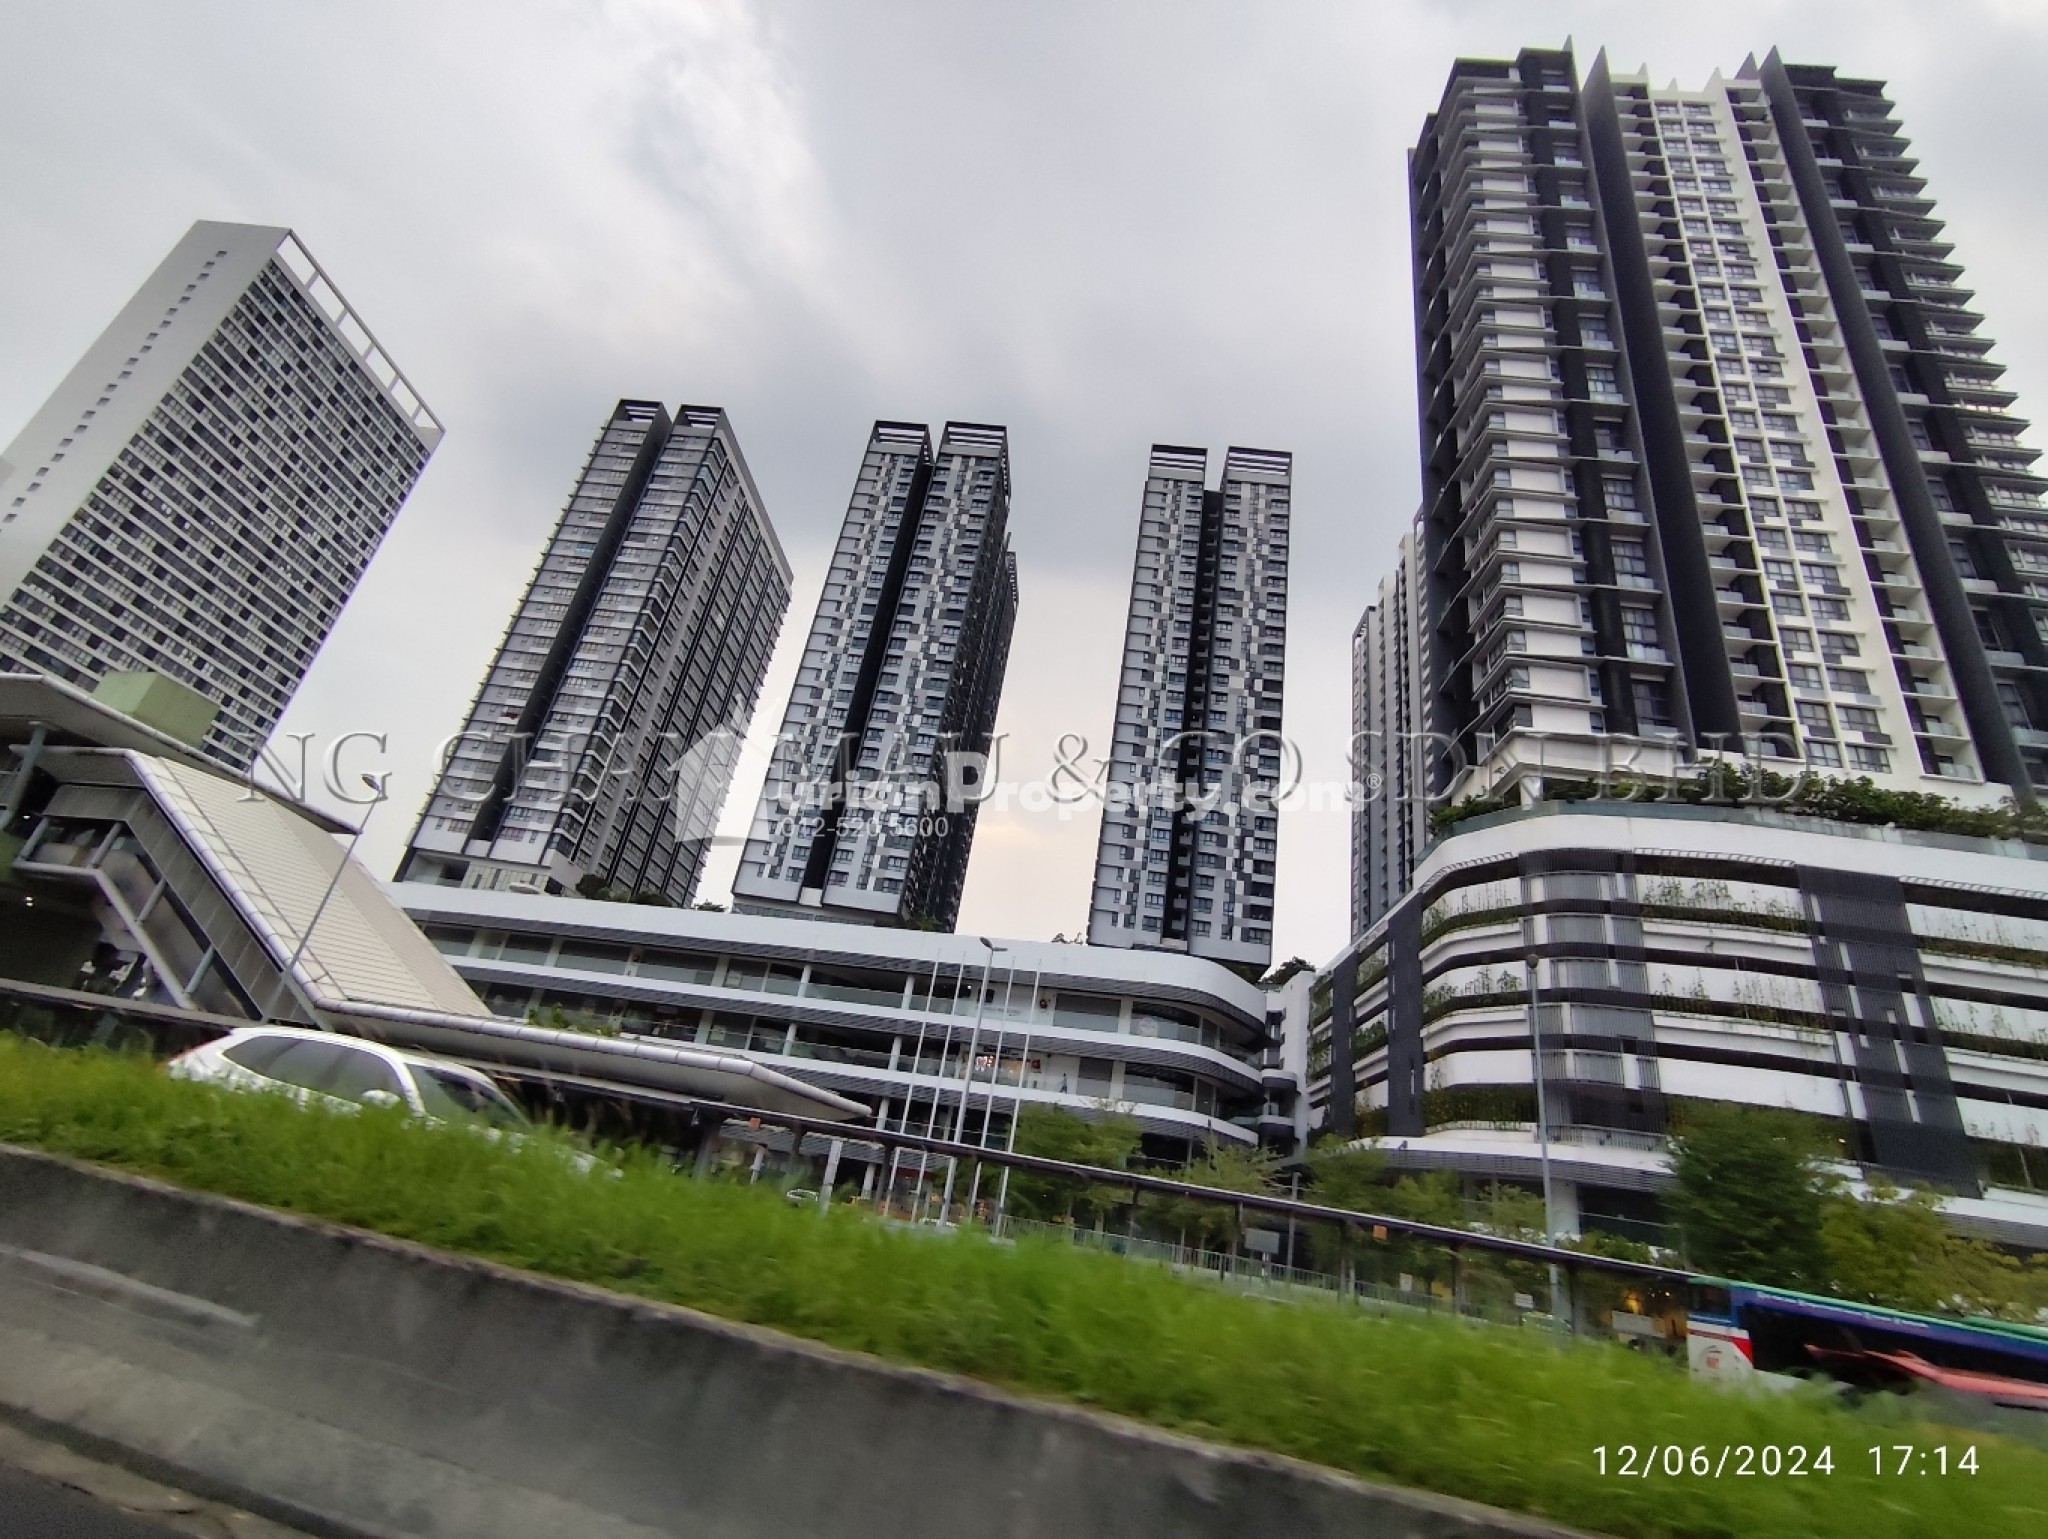 Serviced Residence For Auction at D'Sara Sentral